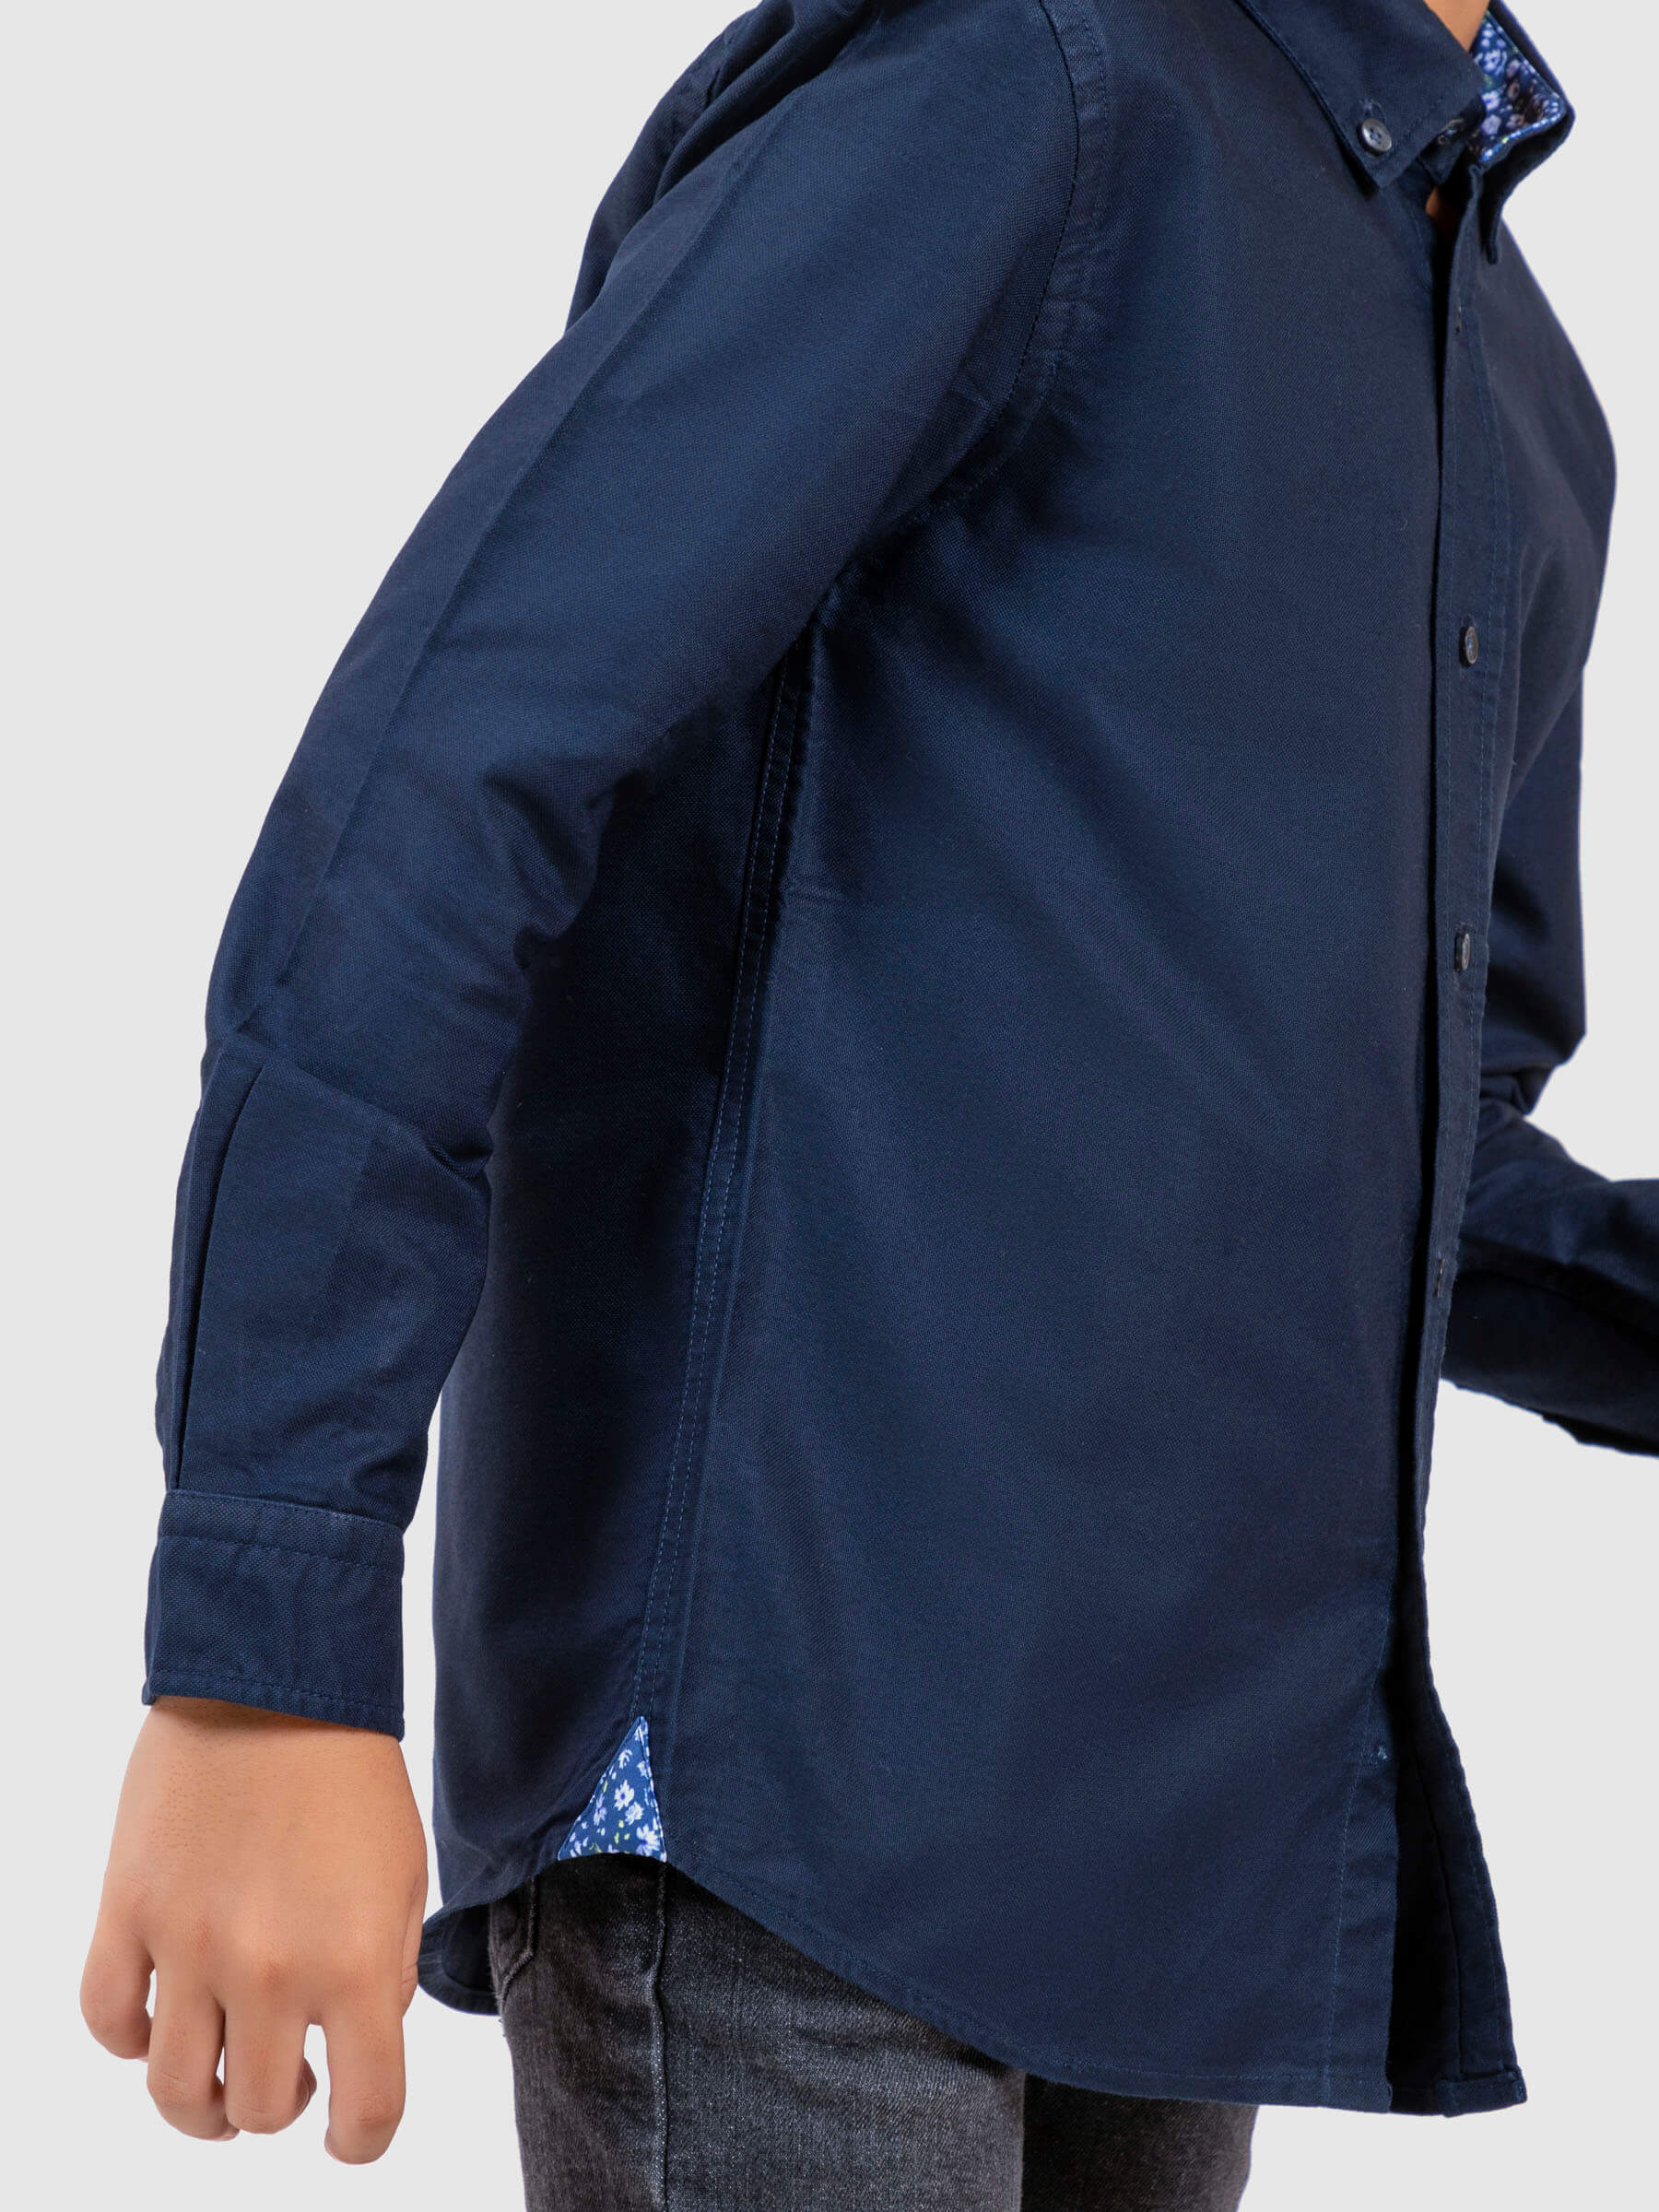 Navy Oxford Long Sleeve Casual Shirt With Detailing Brumano Pakistan